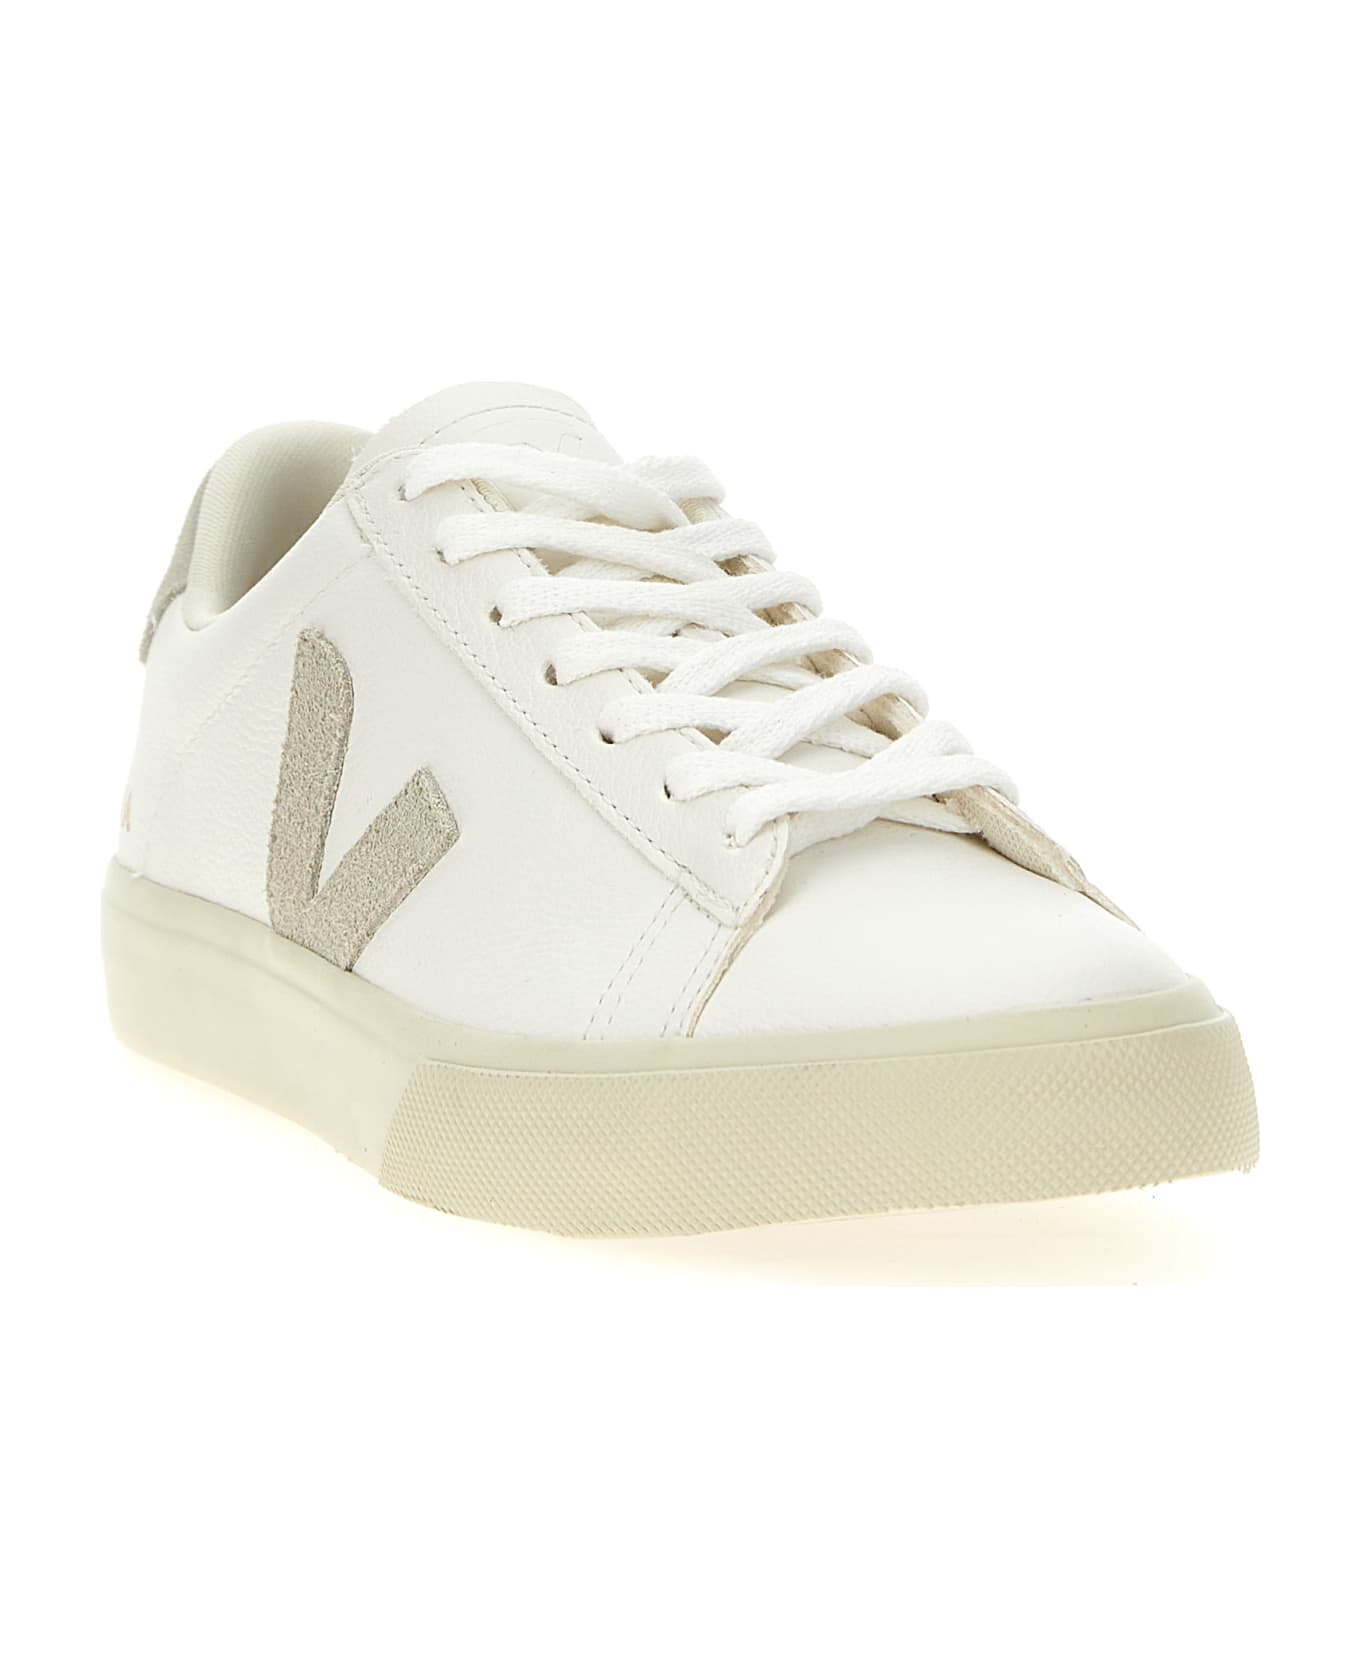 Veja 'campo' Sneakers - Gray スニーカー